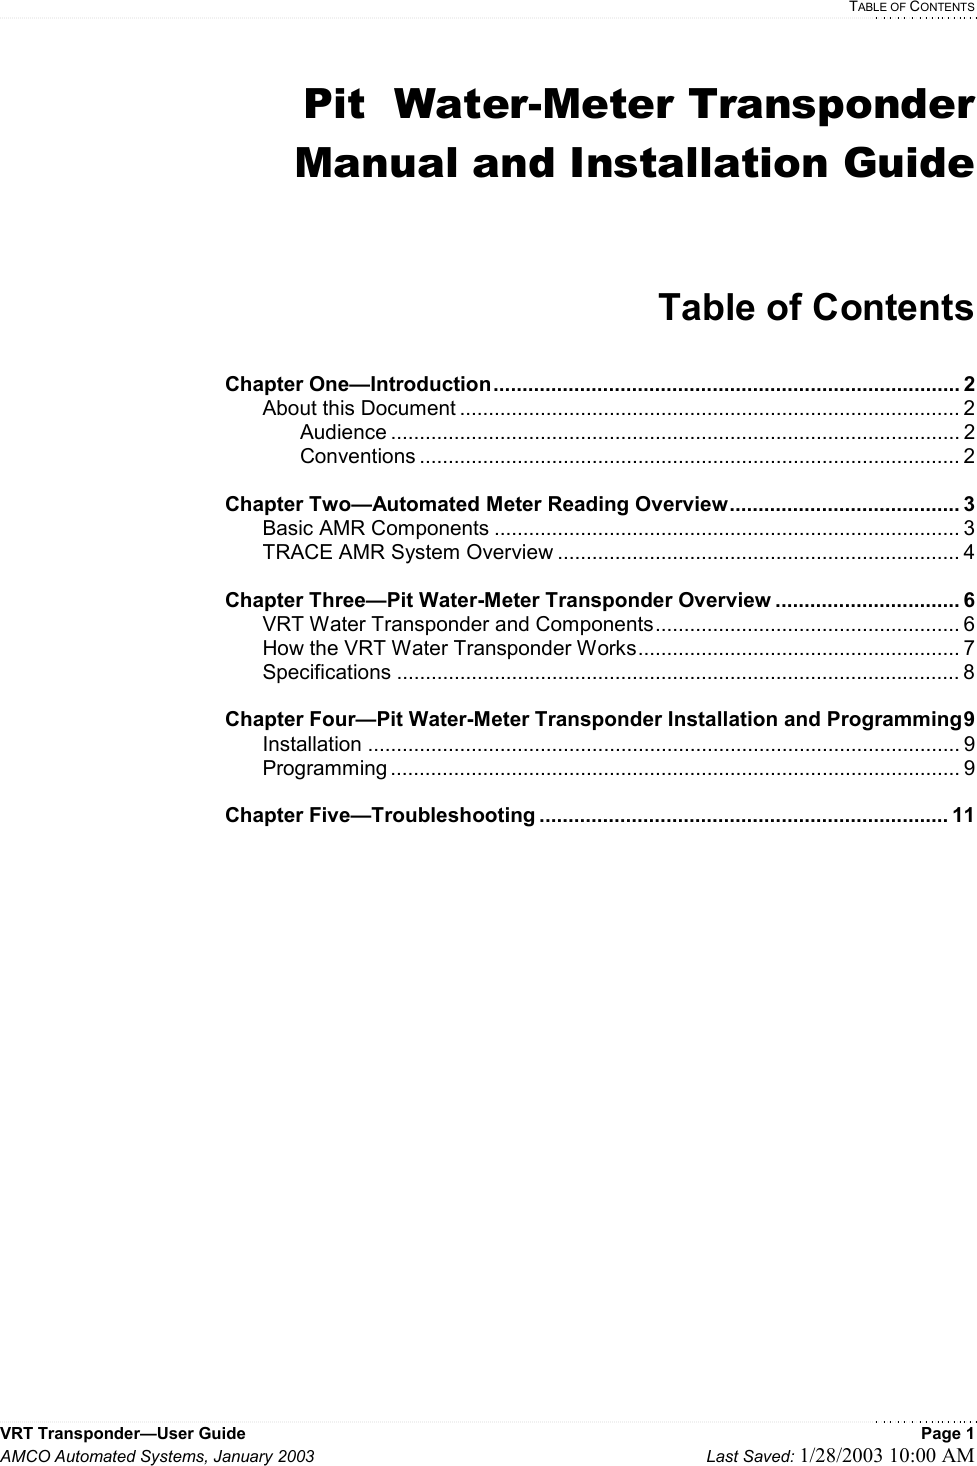   TABLE OF CONTENTS VRT Transponder—User Guide    Page 1 AMCO Automated Systems, January 2003    Last Saved: 1/28/2003 10:00 AM  Pit  Water-Meter Transponder Manual and Installation Guide   Table of Contents  Chapter One—Introduction................................................................................. 2   About this Document ....................................................................................... 2   Audience ................................................................................................... 2   Conventions .............................................................................................. 2  Chapter Two—Automated Meter Reading Overview........................................ 3  Basic AMR Components ................................................................................. 3   TRACE AMR System Overview ...................................................................... 4  Chapter Three—Pit Water-Meter Transponder Overview ................................ 6   VRT Water Transponder and Components..................................................... 6   How the VRT Water Transponder Works........................................................ 7  Specifications .................................................................................................. 8  Chapter Four—Pit Water-Meter Transponder Installation and Programming9  Installation ....................................................................................................... 9  Programming ................................................................................................... 9  Chapter Five—Troubleshooting ....................................................................... 11           